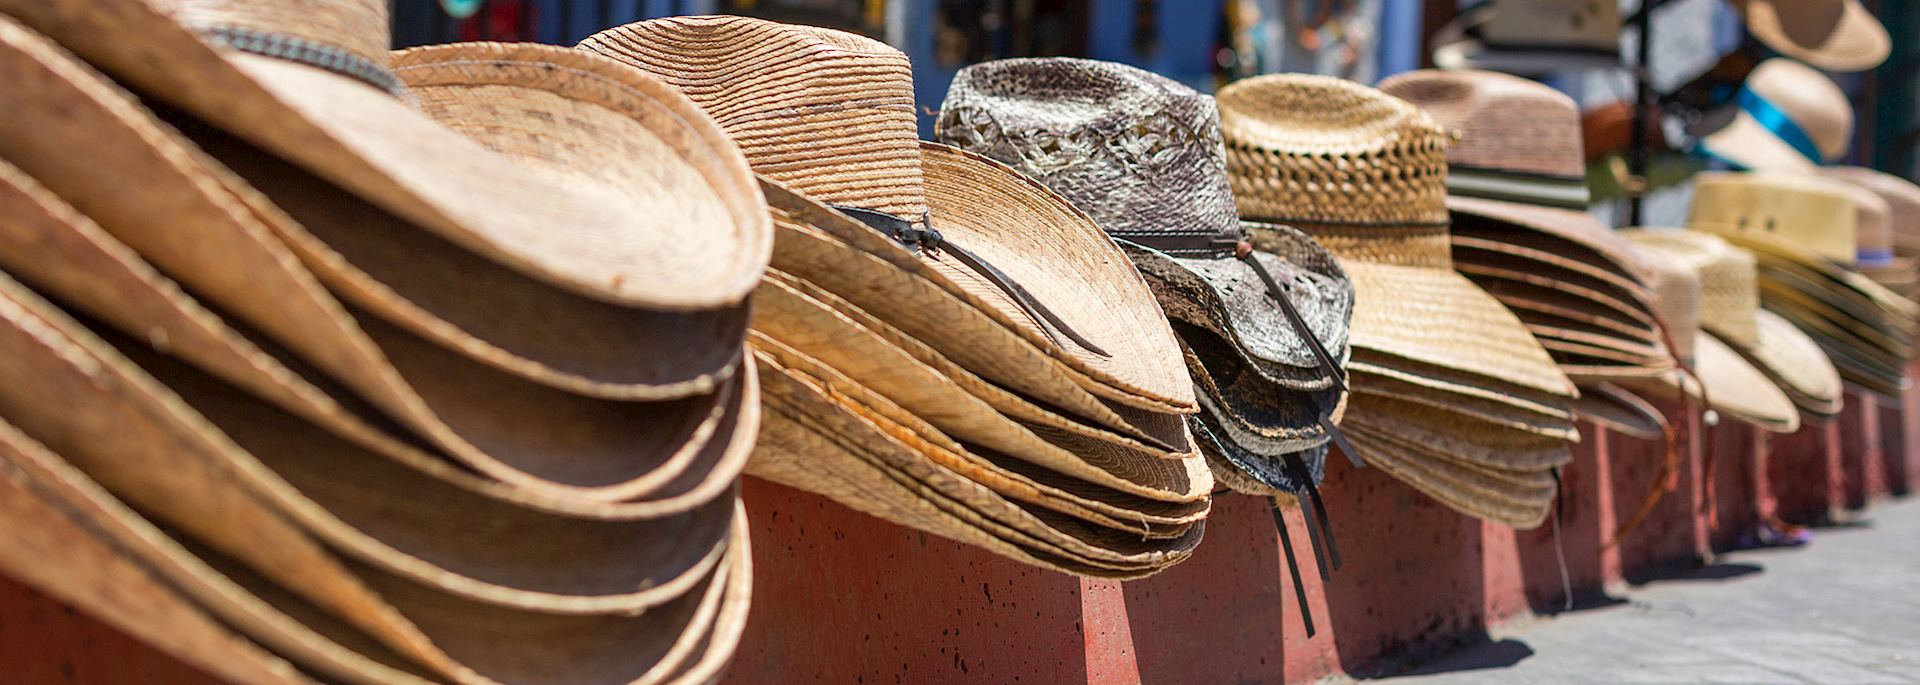 Hat stall in Todos Santos